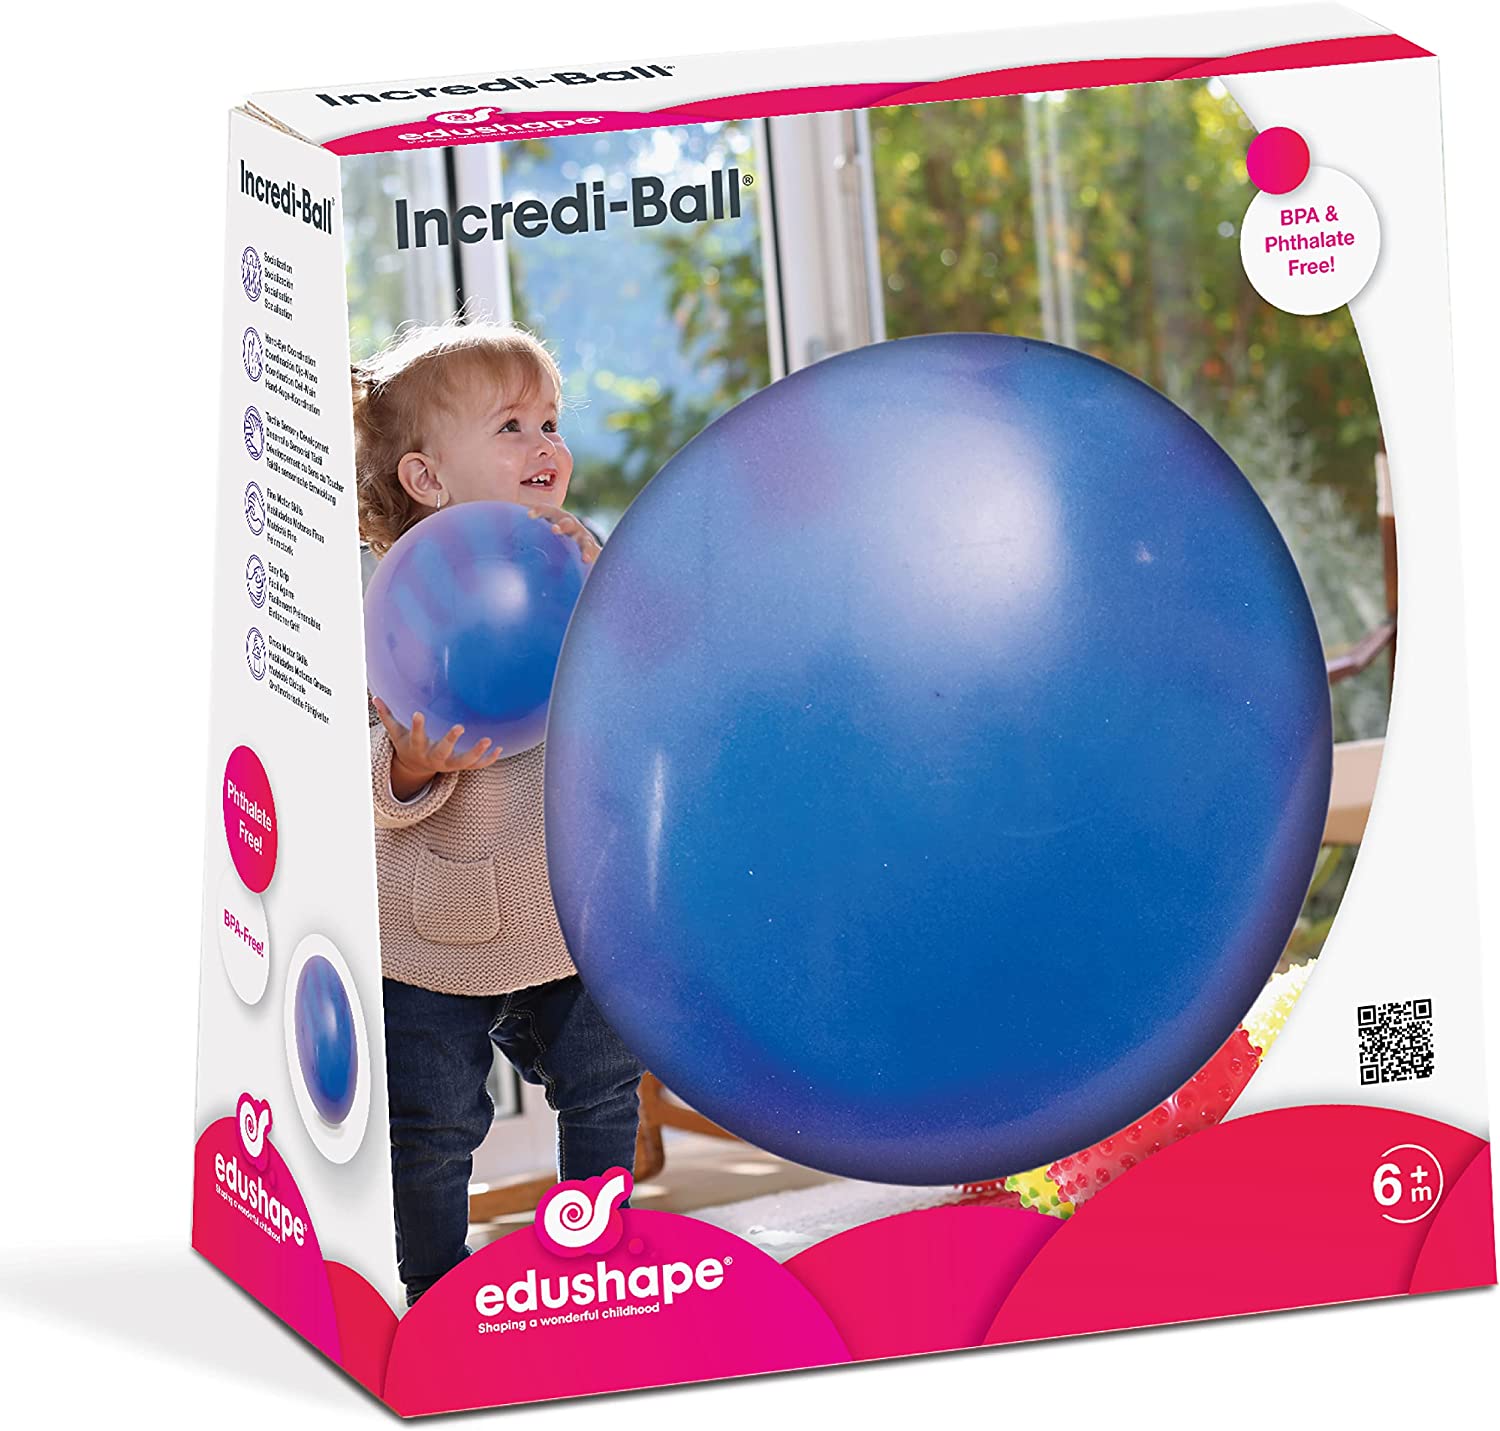 Edushape 18cm Incredi-Ball, Wow! Learn all about heat sensitivity and colour changing with this amazing new take on the classic Edushape sensory balls. Watch as your handprints appear in magical different colours when you touch the Incredi-ball! The heat sensitivity means little ones will love seeing the different colours appear and disappear – teaching cause and effect whilst providing visual stimulation. The Incredi-ball also teaches fine and gross motor skills, whilst being a magical first ball for your 